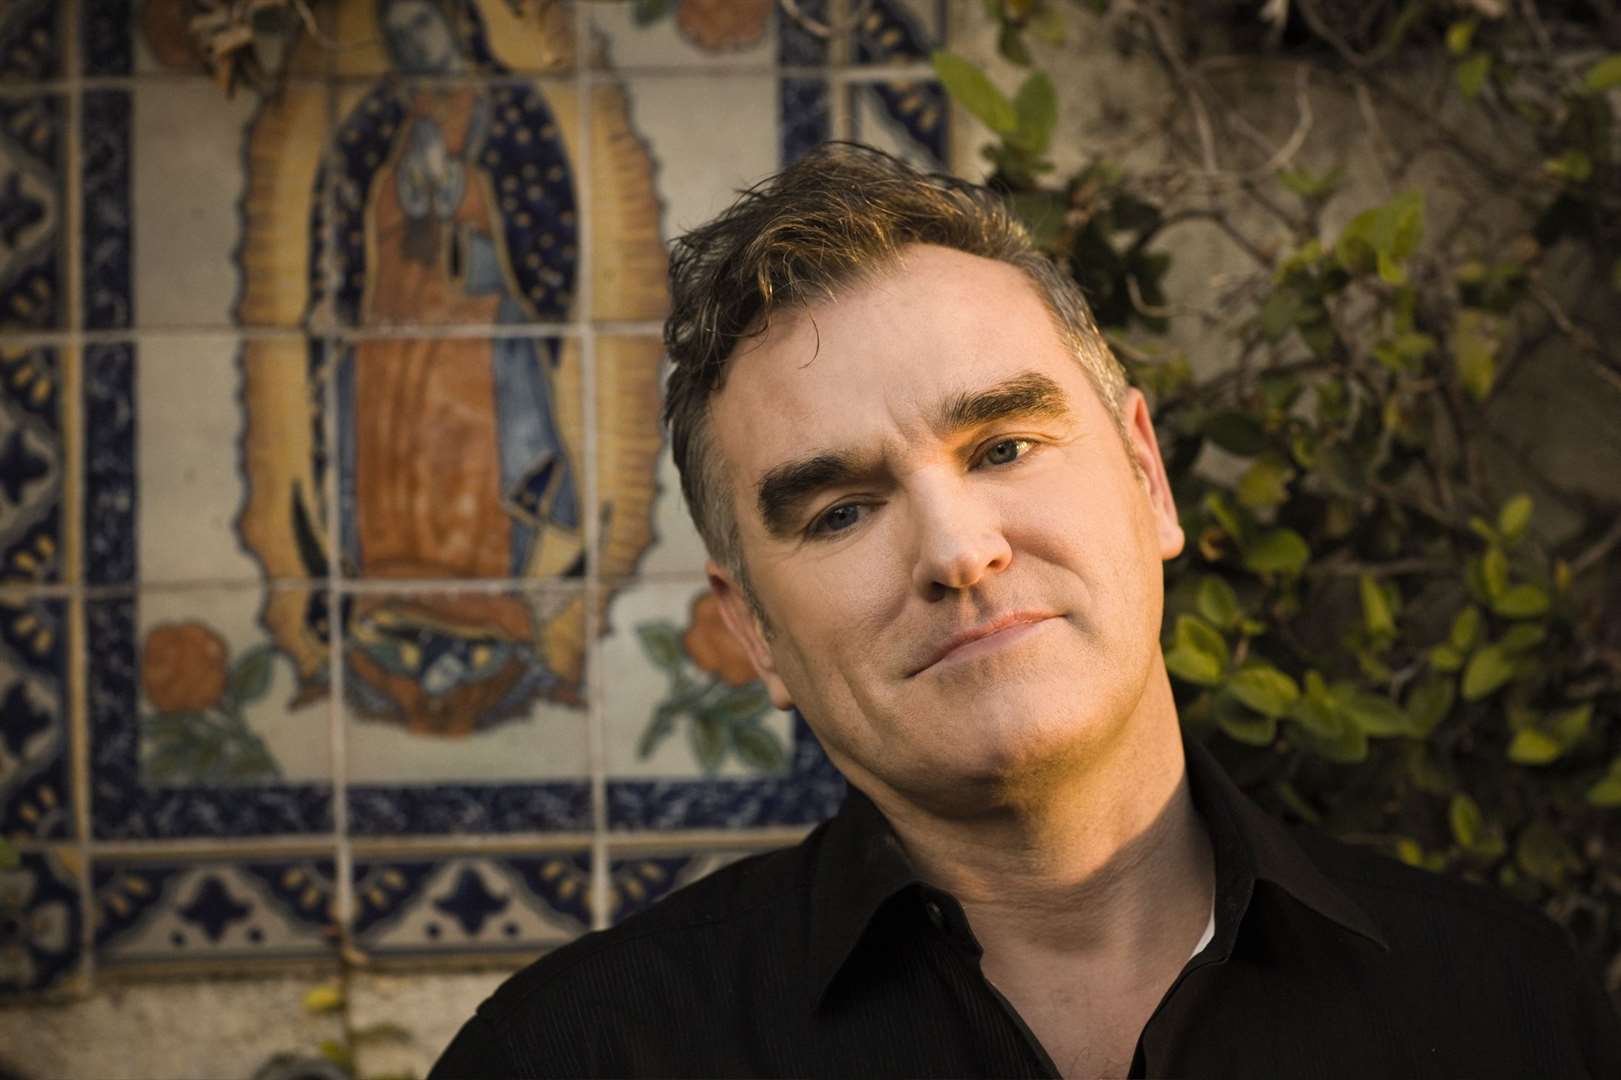 Morrissey continues to sell-out arenas around the world. Picture: Travis Shinn